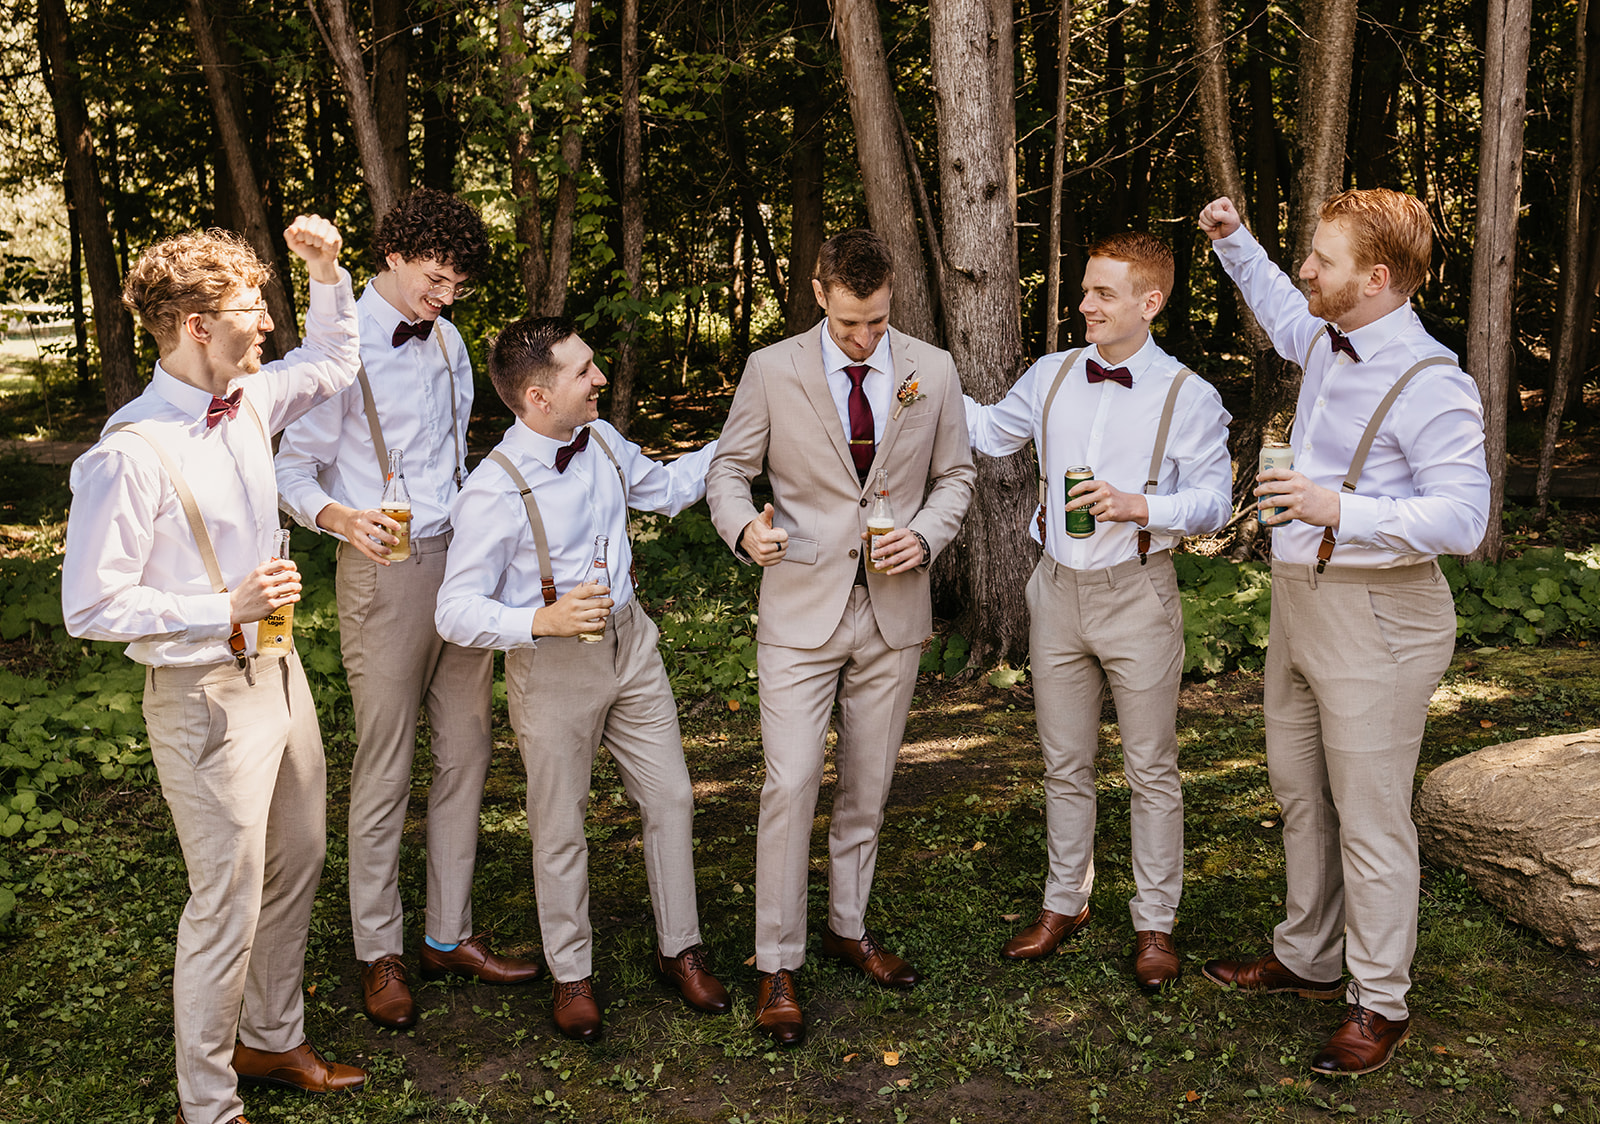 Chris hartwig and his groomsmen on his wedding day